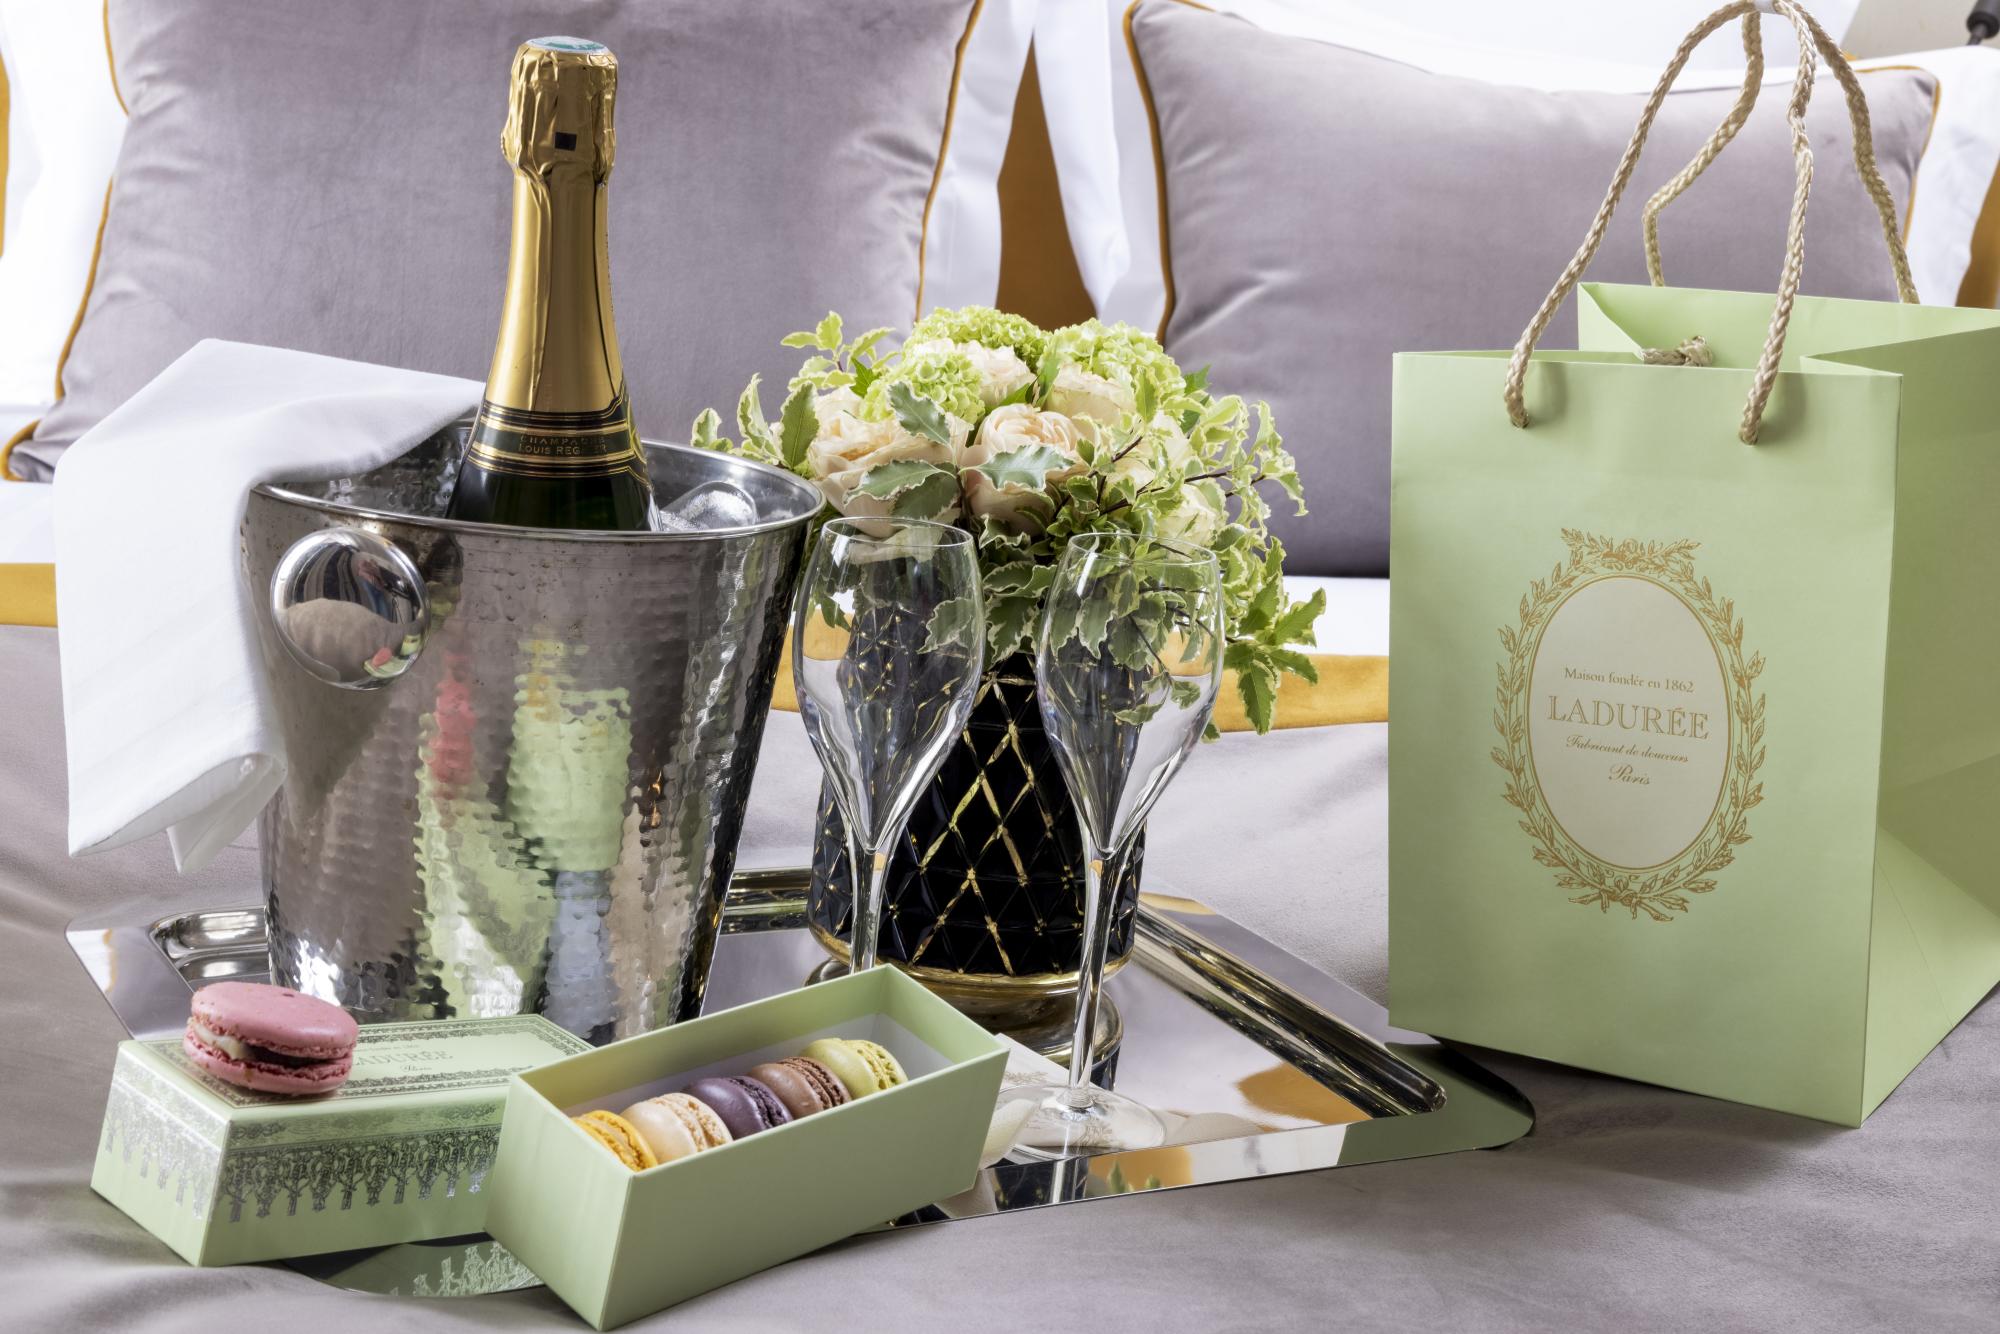 Hotel Vinci Due Offer Package Romantic Champagne Macaroons